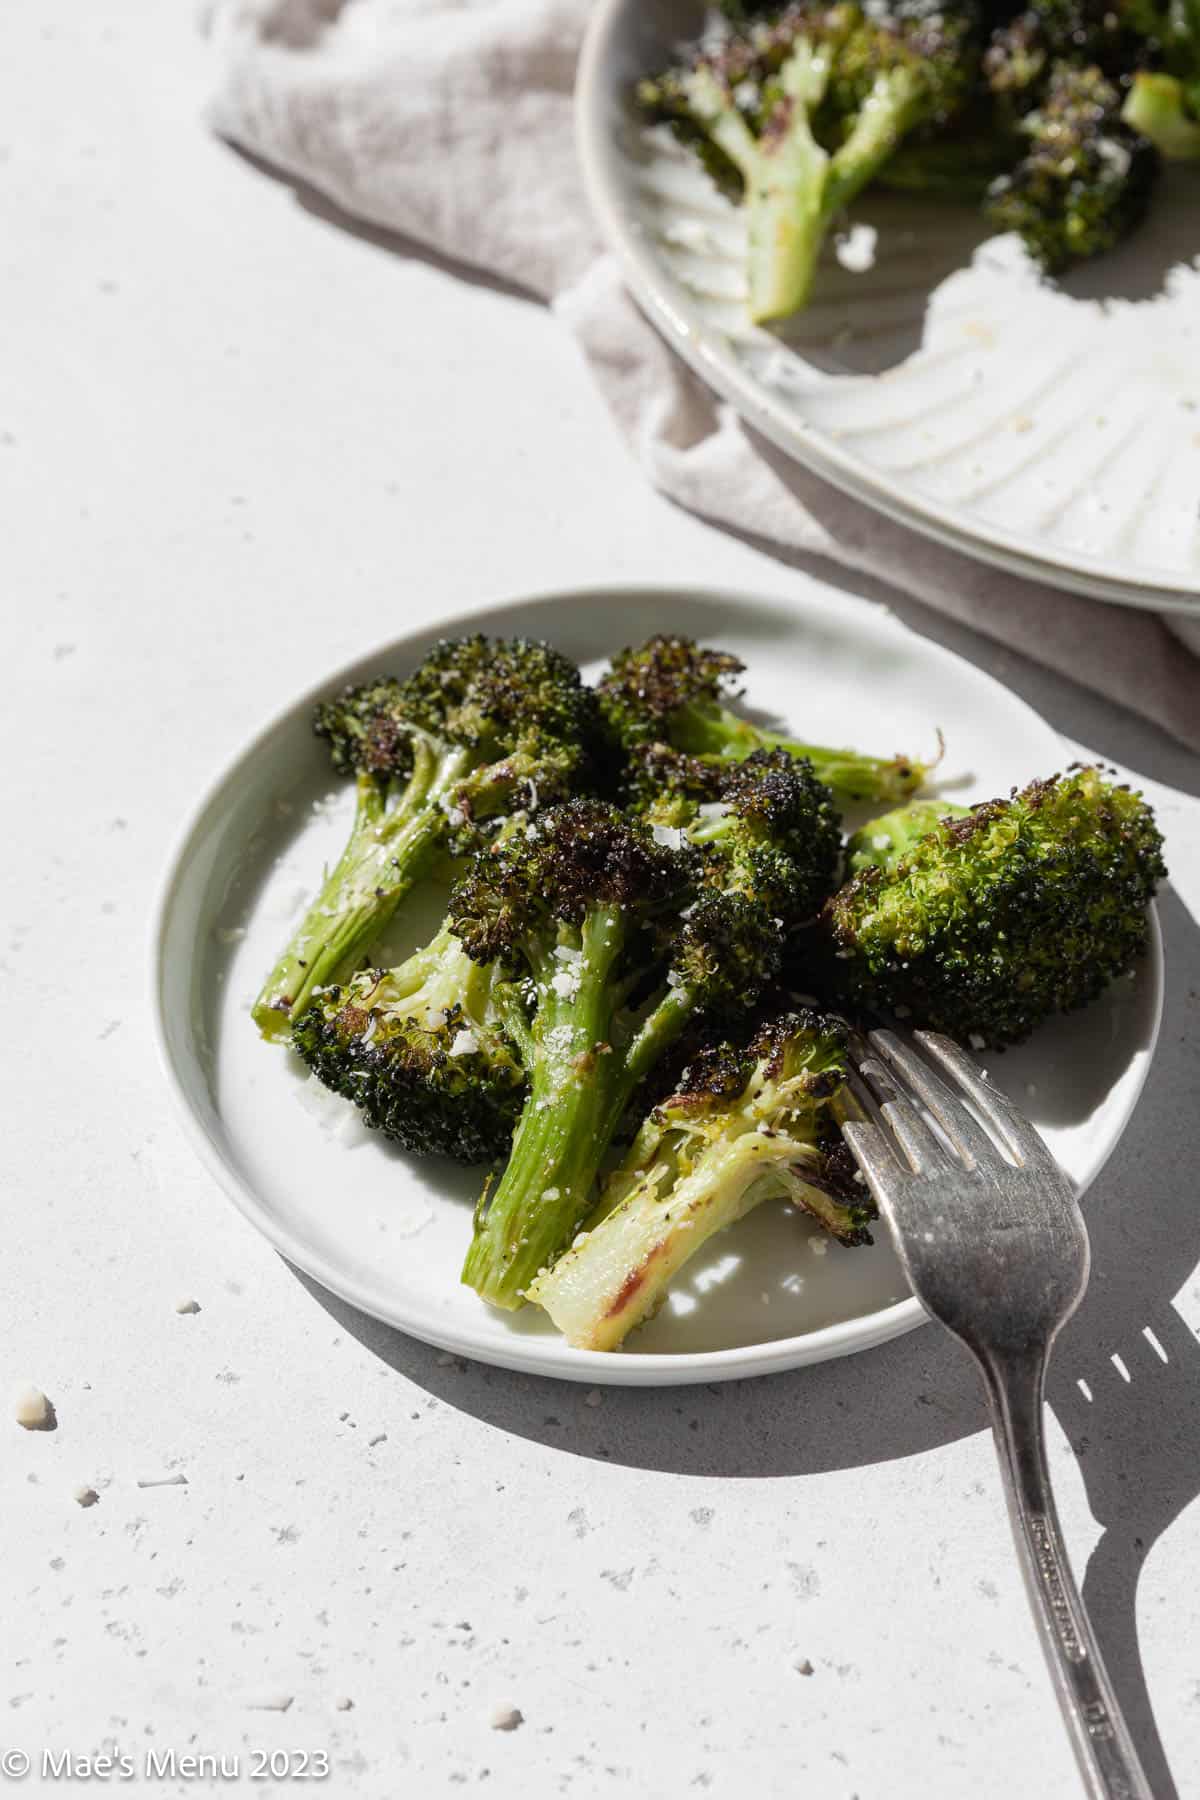 Closeup shot of a small plate of roasted broccoli with a fork.